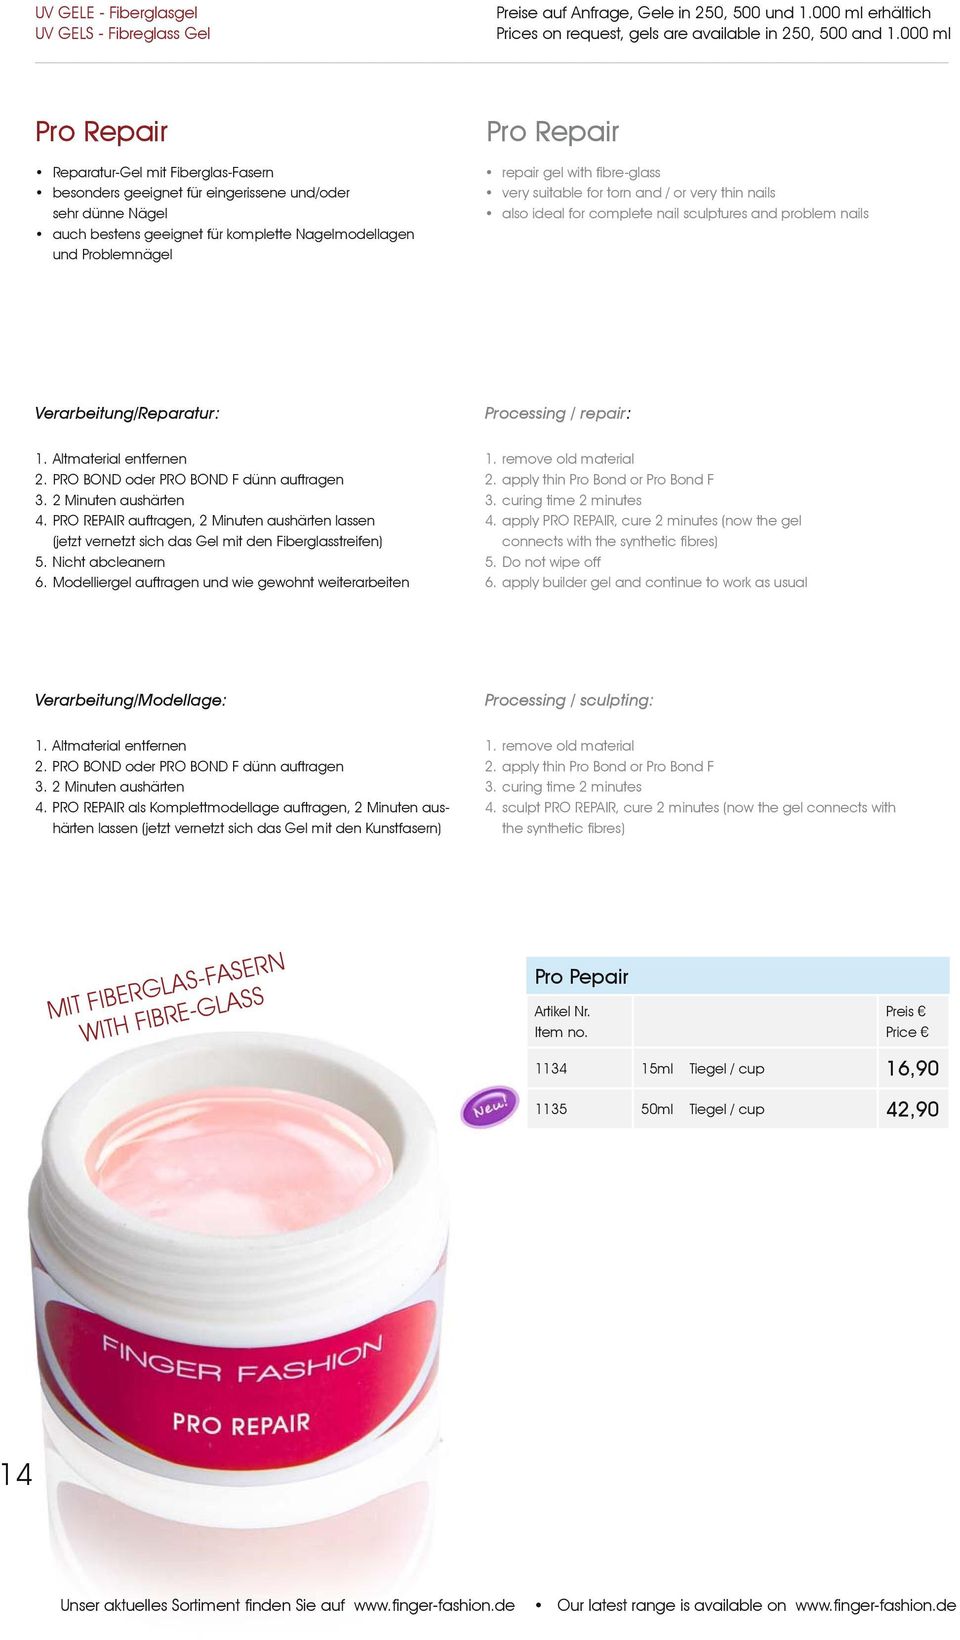 repair gel with fibre-glass very suitable for torn and / or very thin nails also ideal for complete nail sculptures and problem nails Verarbeitung/Reparatur: Processing / repair: 1.